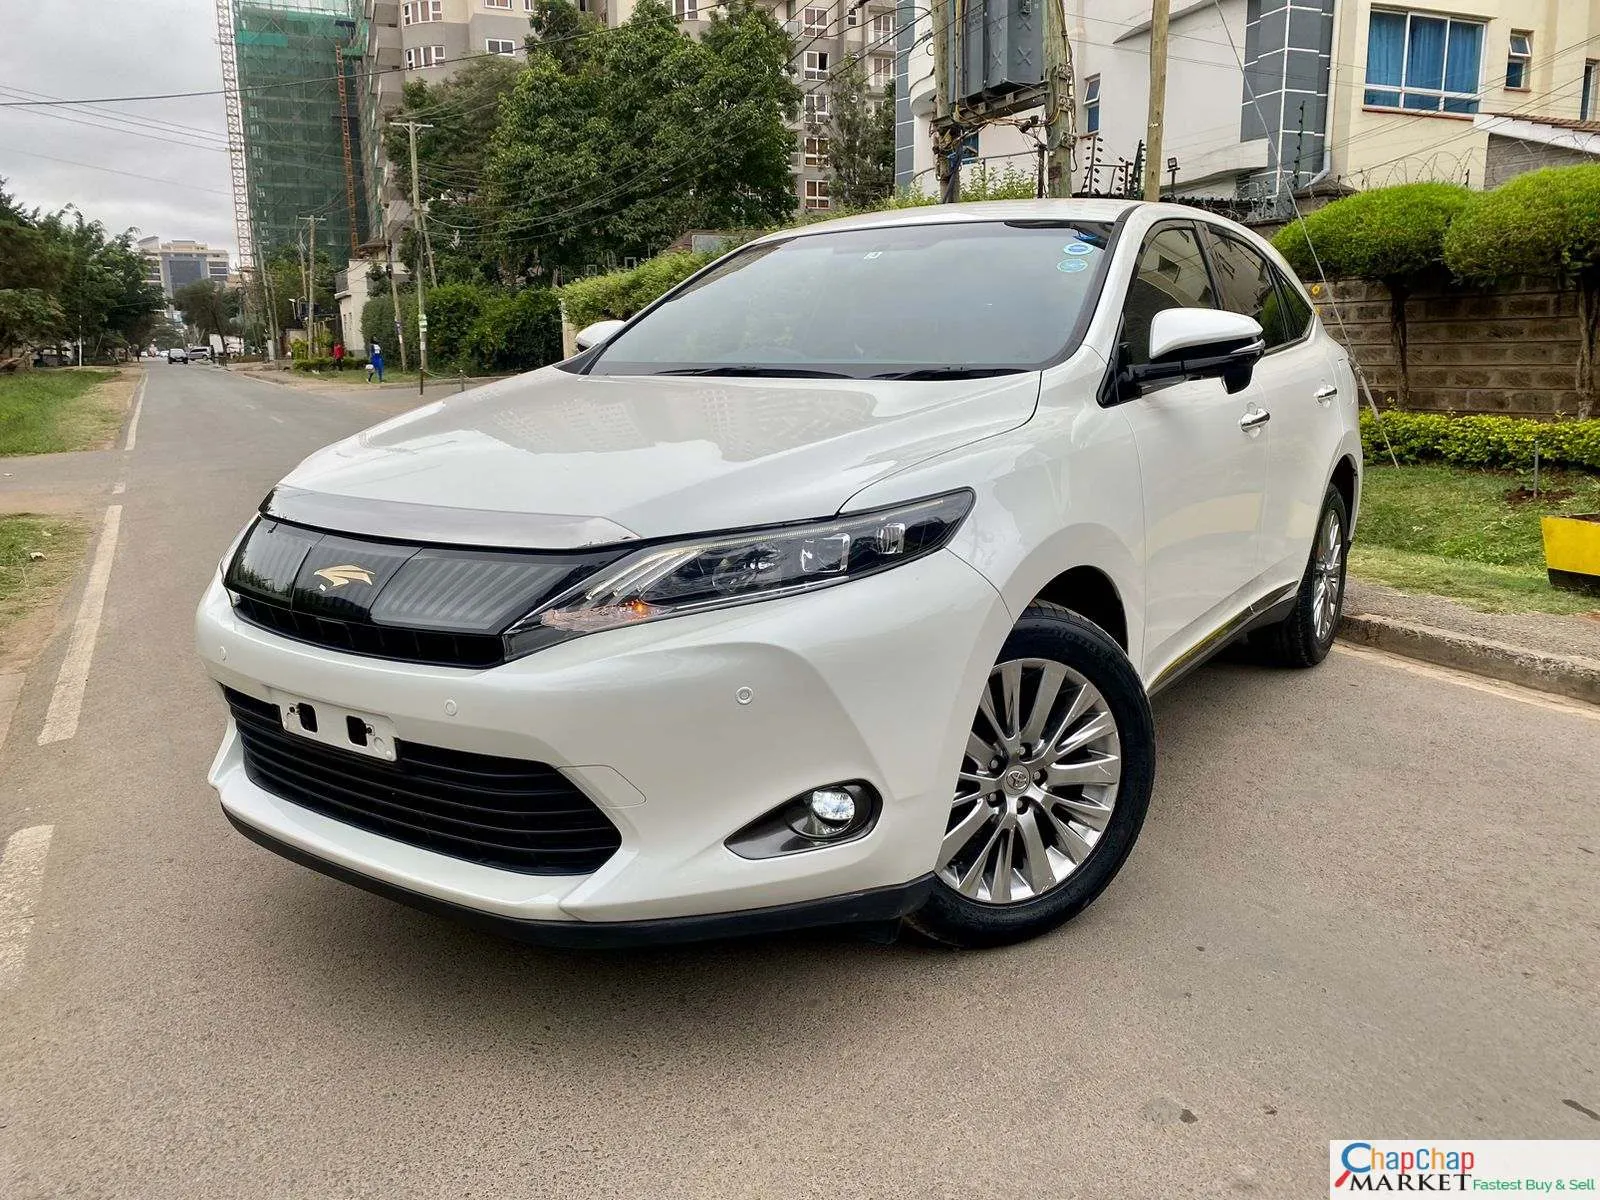 Cars Cars For Sale/Vehicles-Toyota Harrier for Sale in Kenya Just Arrived Hire Purchase Installments Trade in OK EXCLUSIVE 9